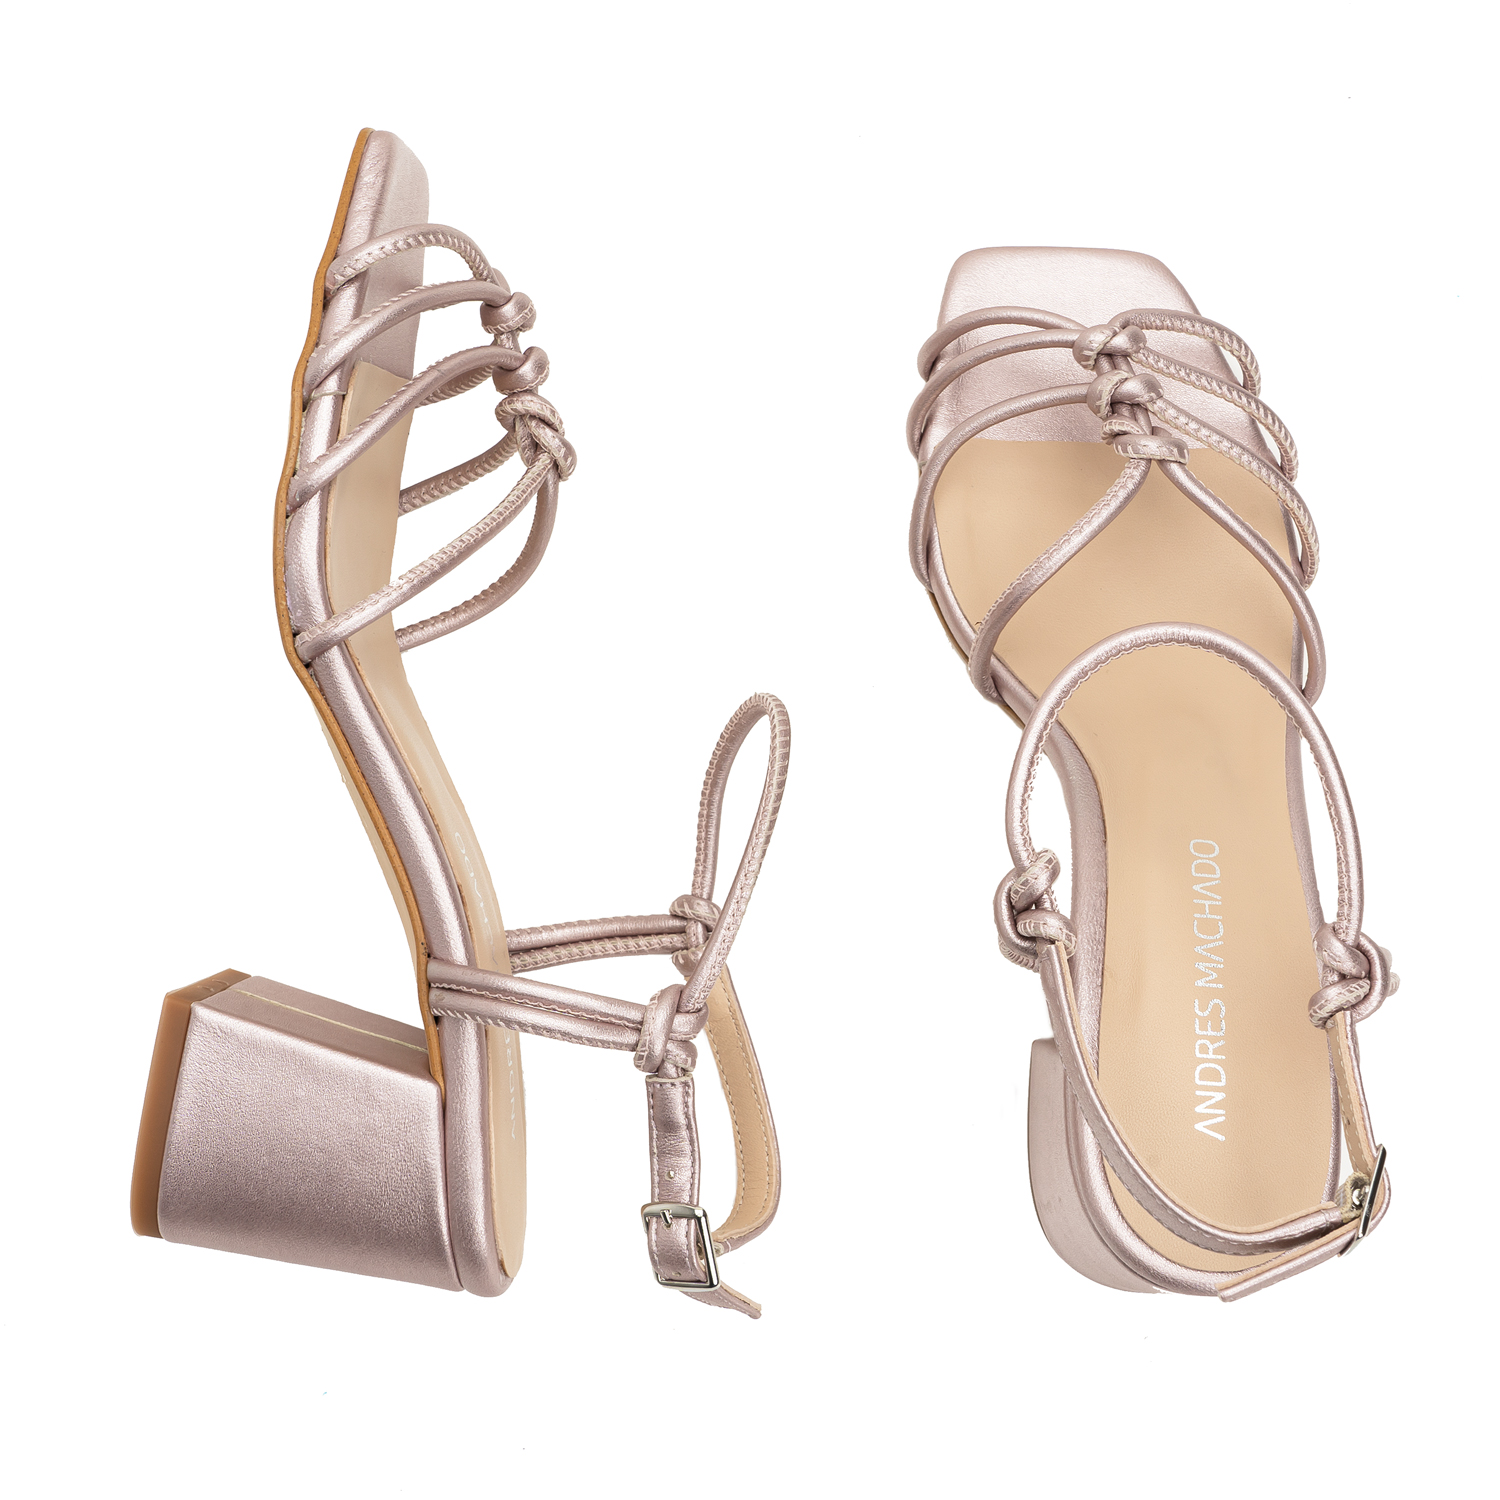 Knotted Sandals in Metallic Pink Leather 